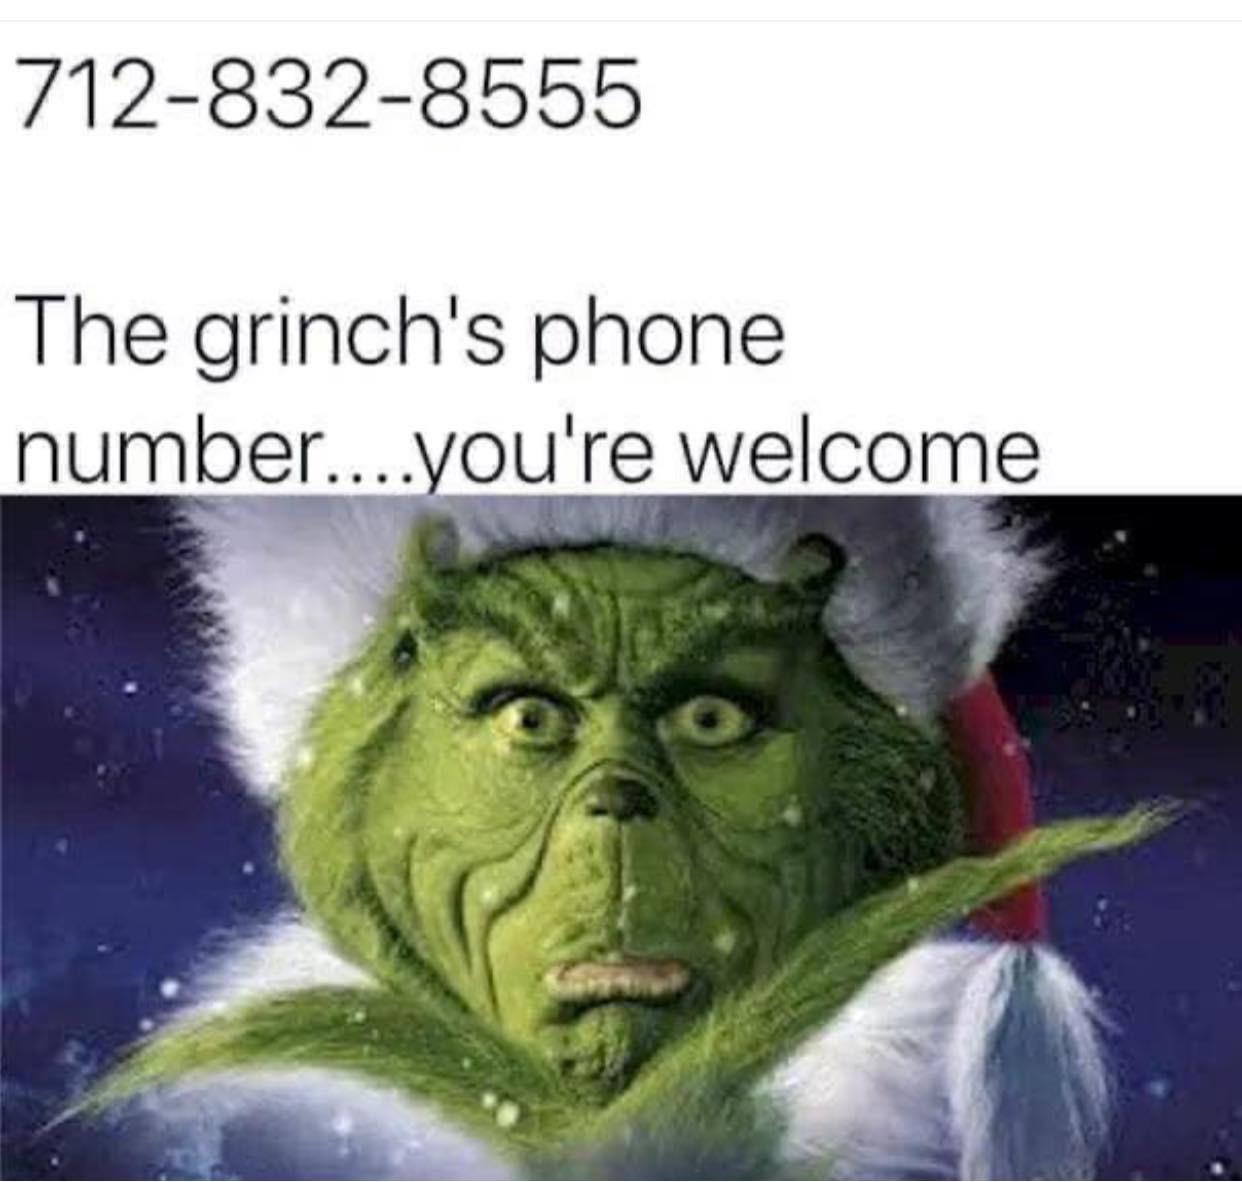 cool randoms  - grinch stole christmas - 7128328555 The grinch's phone number....you're welcome